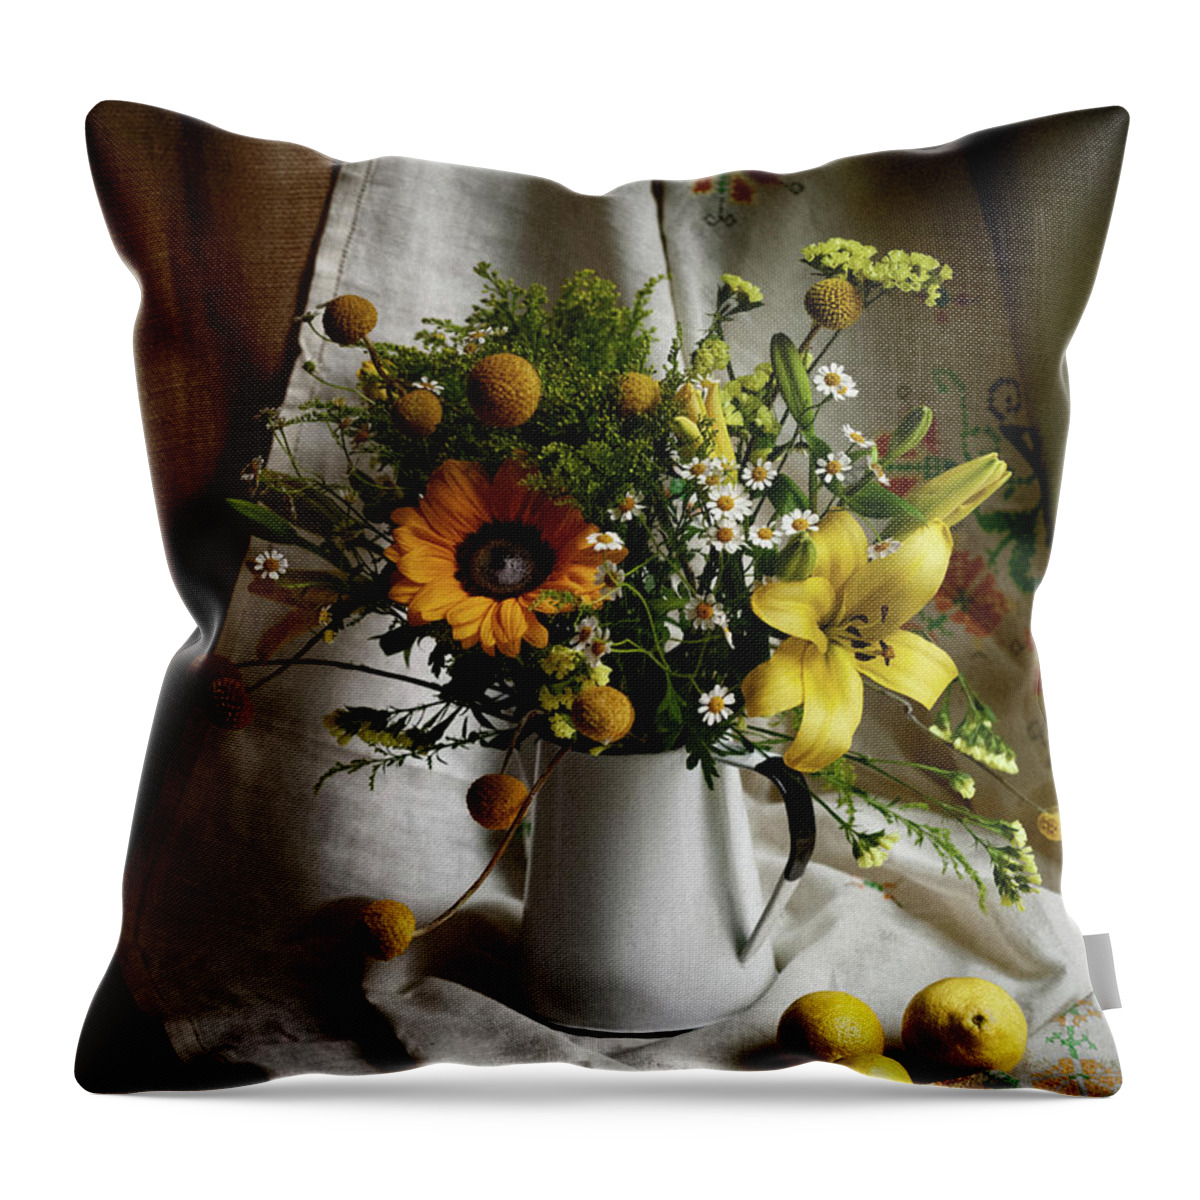 Flowers Throw Pillow featuring the photograph Flowers and Lemons by Alexander Fedin